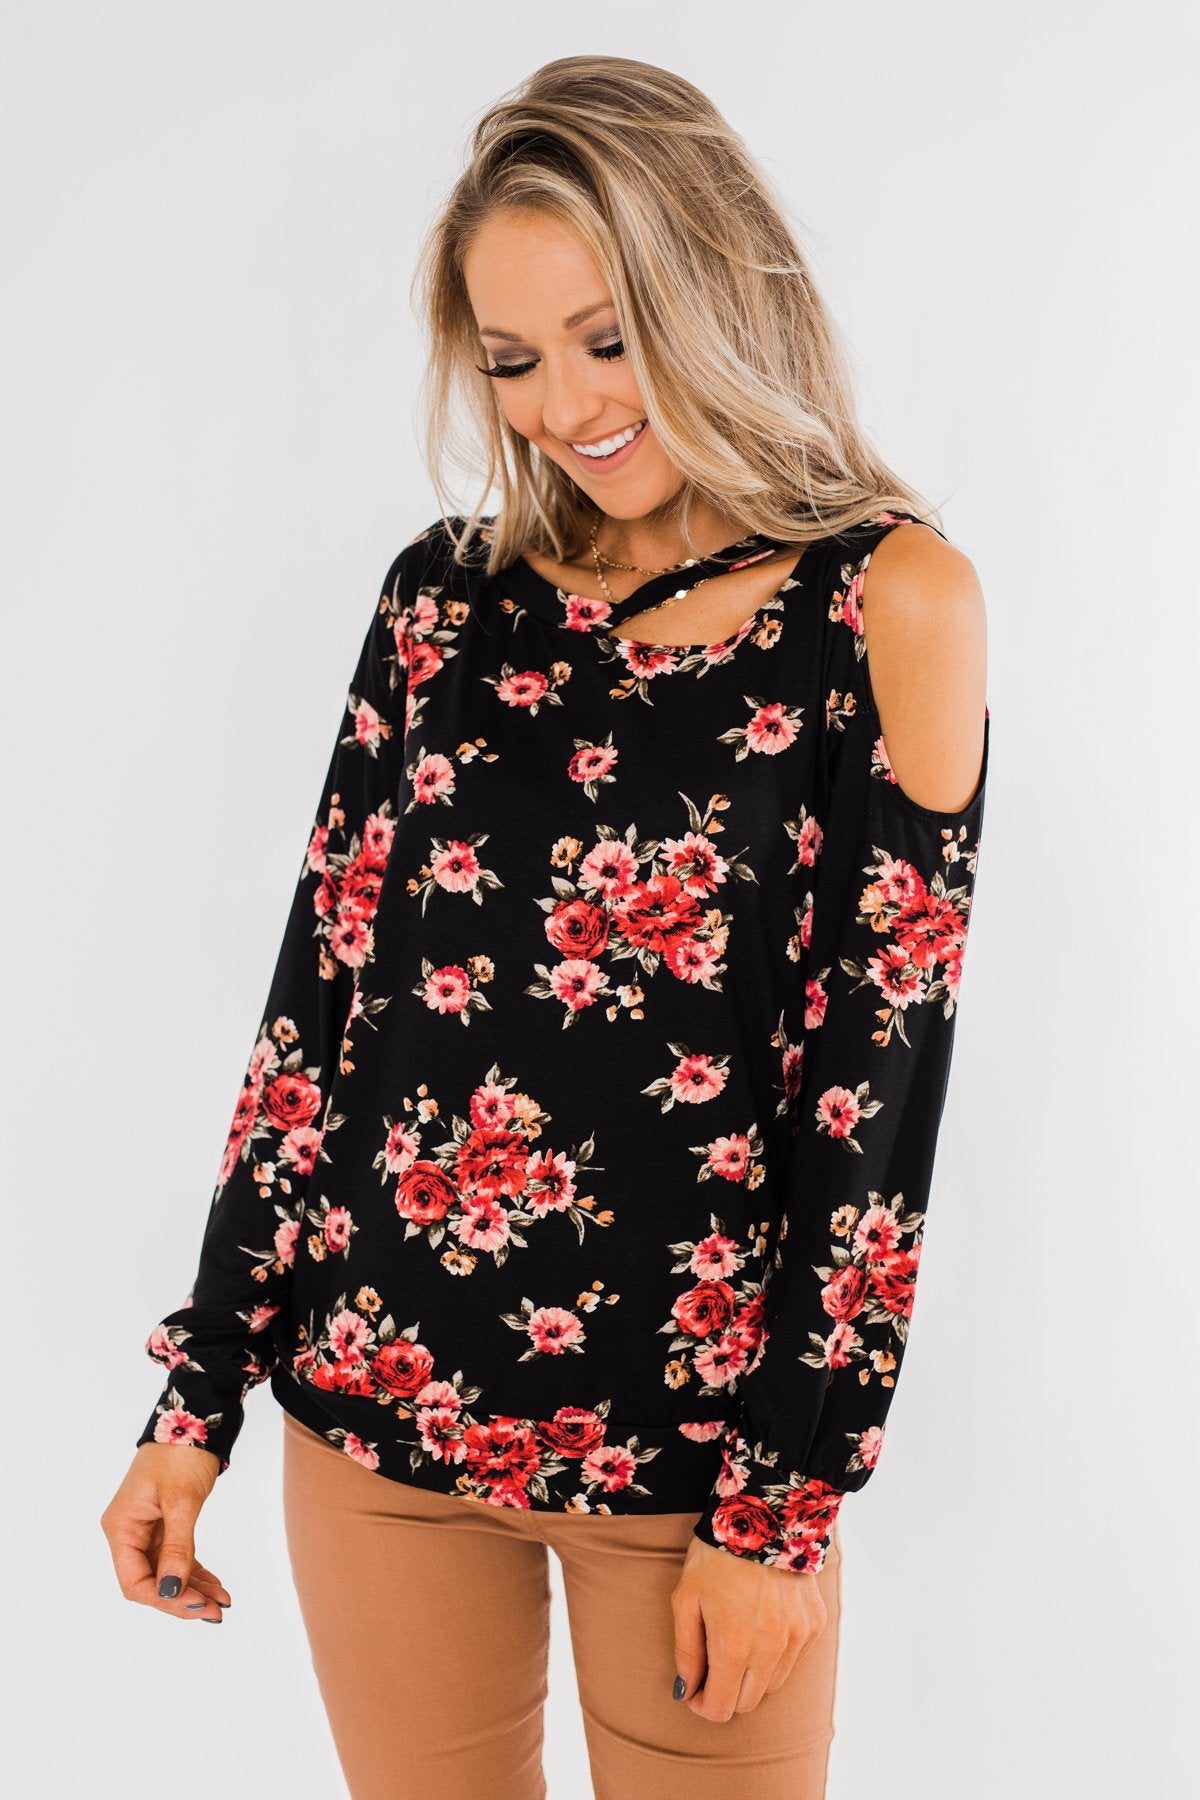 Never Alone Long Sleeve Floral Top- Black